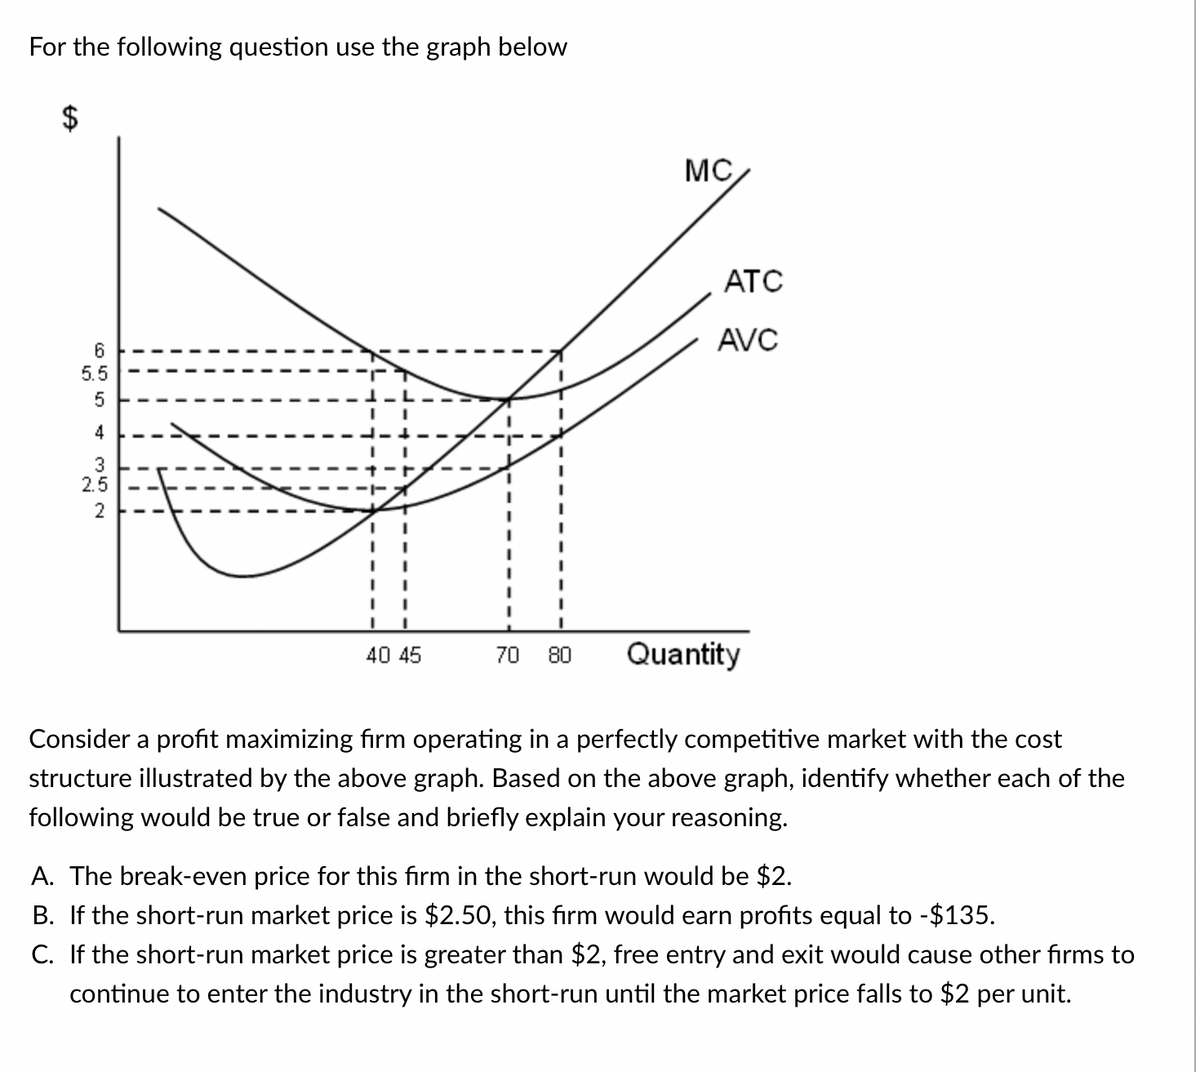 For the following question use the graph below
655 35~
5.5
4
2.5
2
40 45
I
70 80
MC
ATC
AVC
Quantity
Consider a profit maximizing firm operating in a perfectly competitive market with the cost
structure illustrated by the above graph. Based on the above graph, identify whether each of the
following would be true or false and briefly explain your reasoning.
A. The break-even price for this firm in the short-run would be $2.
B. If the short-run market price is $2.50, this firm would earn profits equal to -$135.
C. If the short-run market price is greater than $2, free entry and exit would cause other firms to
continue to enter the industry in the short-run until the market price falls to $2 per unit.